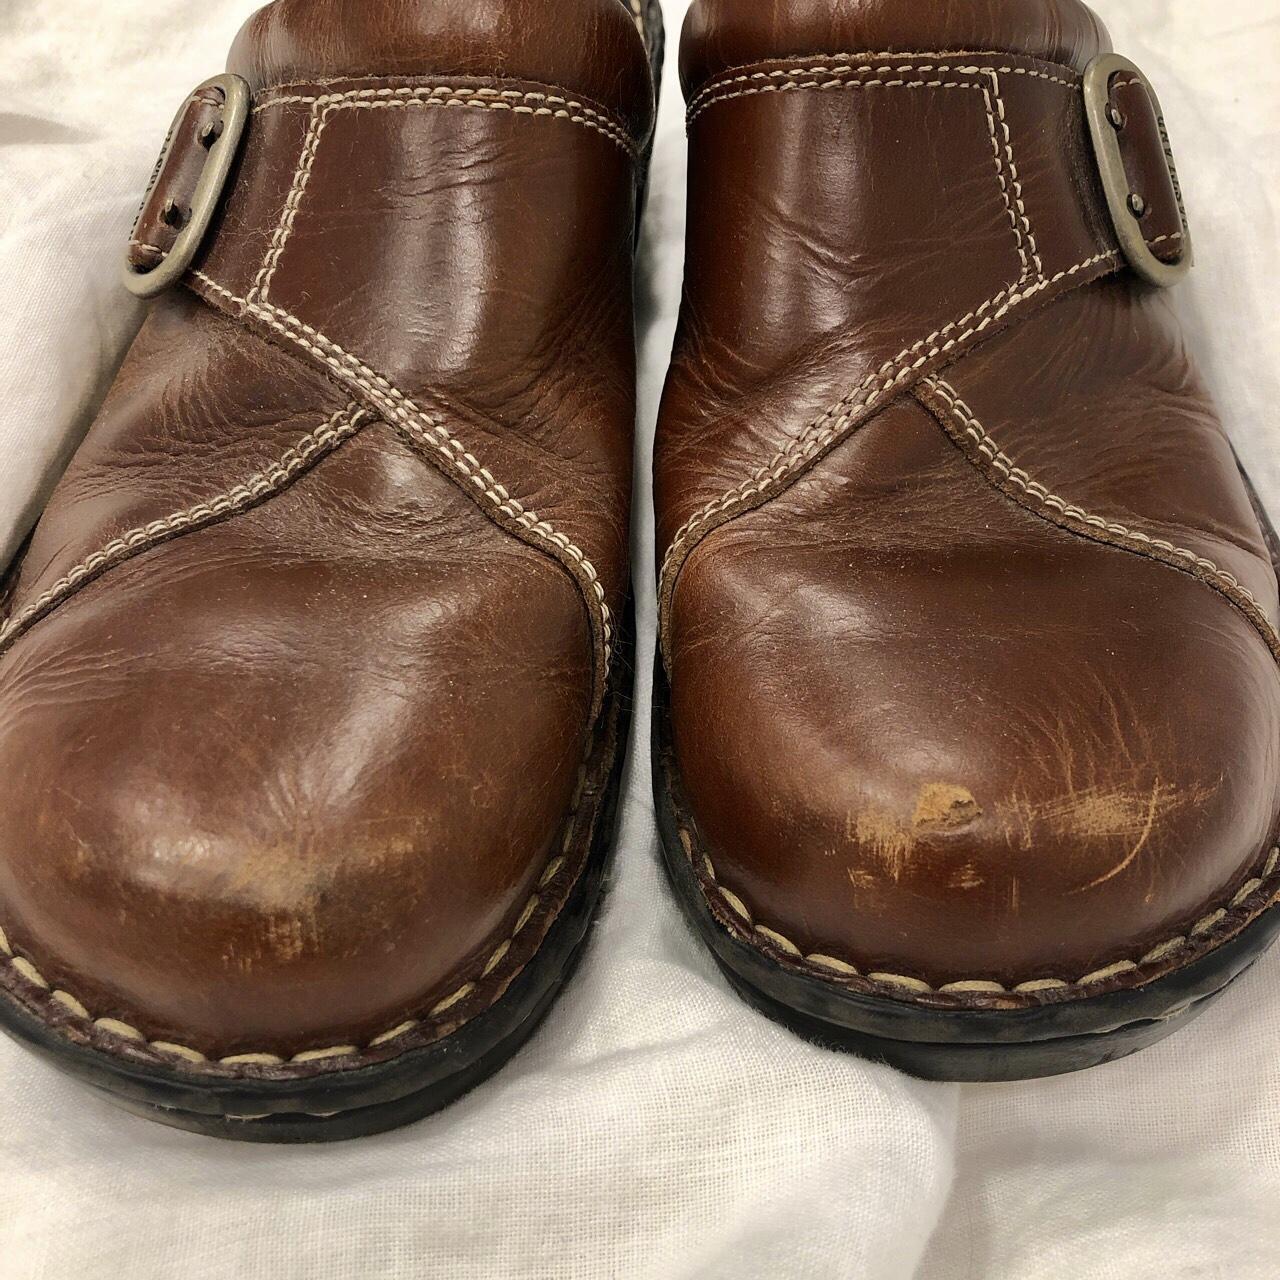 Product Image 4 - Brown Eastland clogs, scuffs pictured.